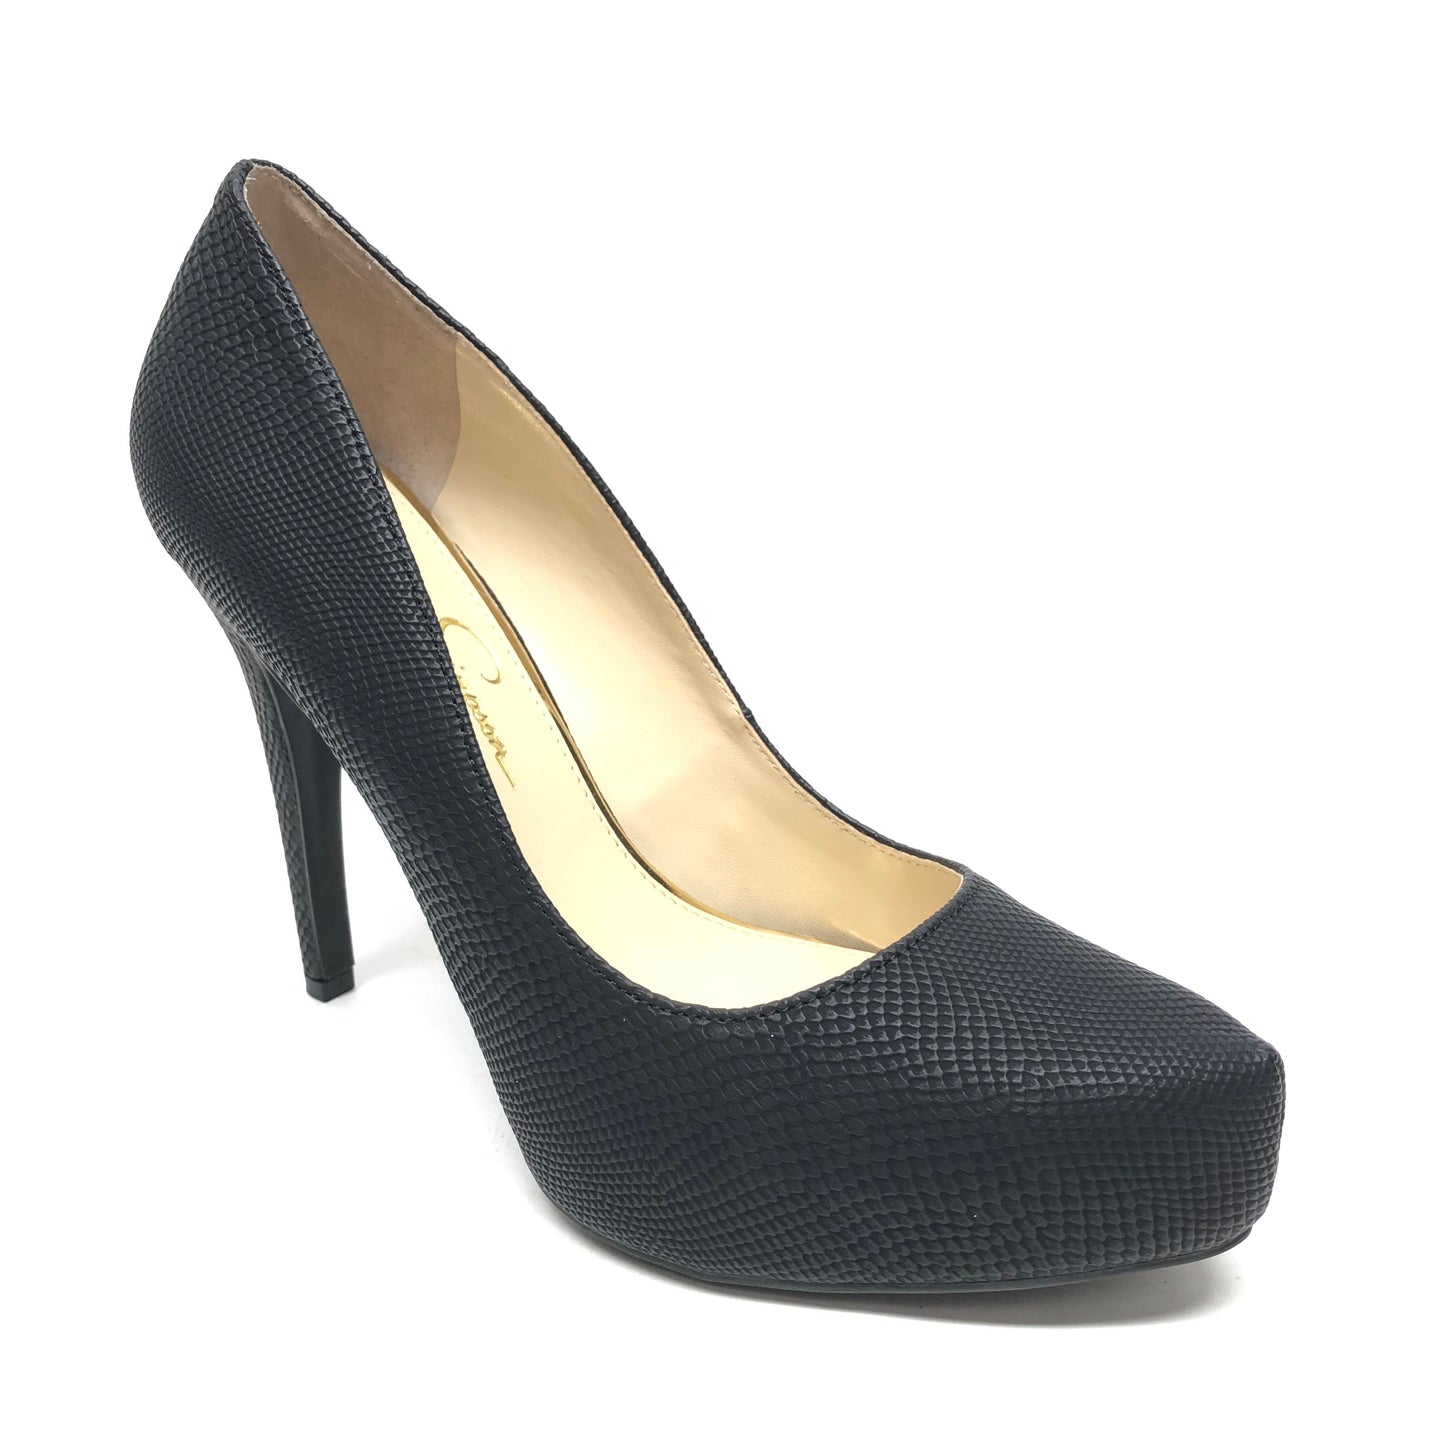 Shoes Heels Stiletto By Jessica Simpson  Size: 9.5